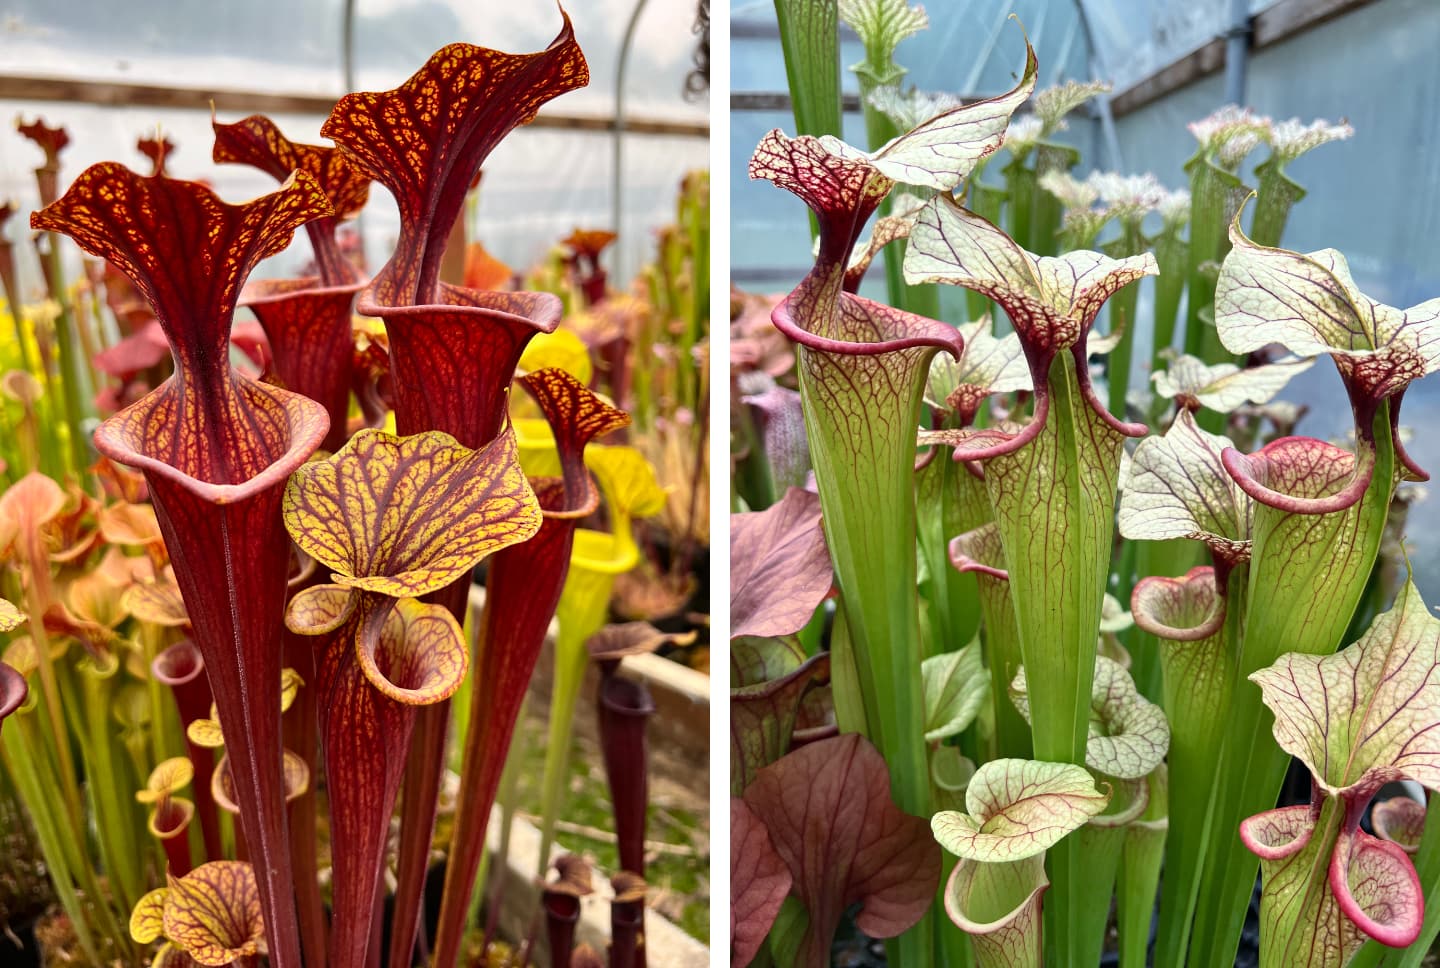 The tall erect species of Sarracenia, often known as trumpet pitchers, grow best in full sun. Here is S. flava and S. × moorei.